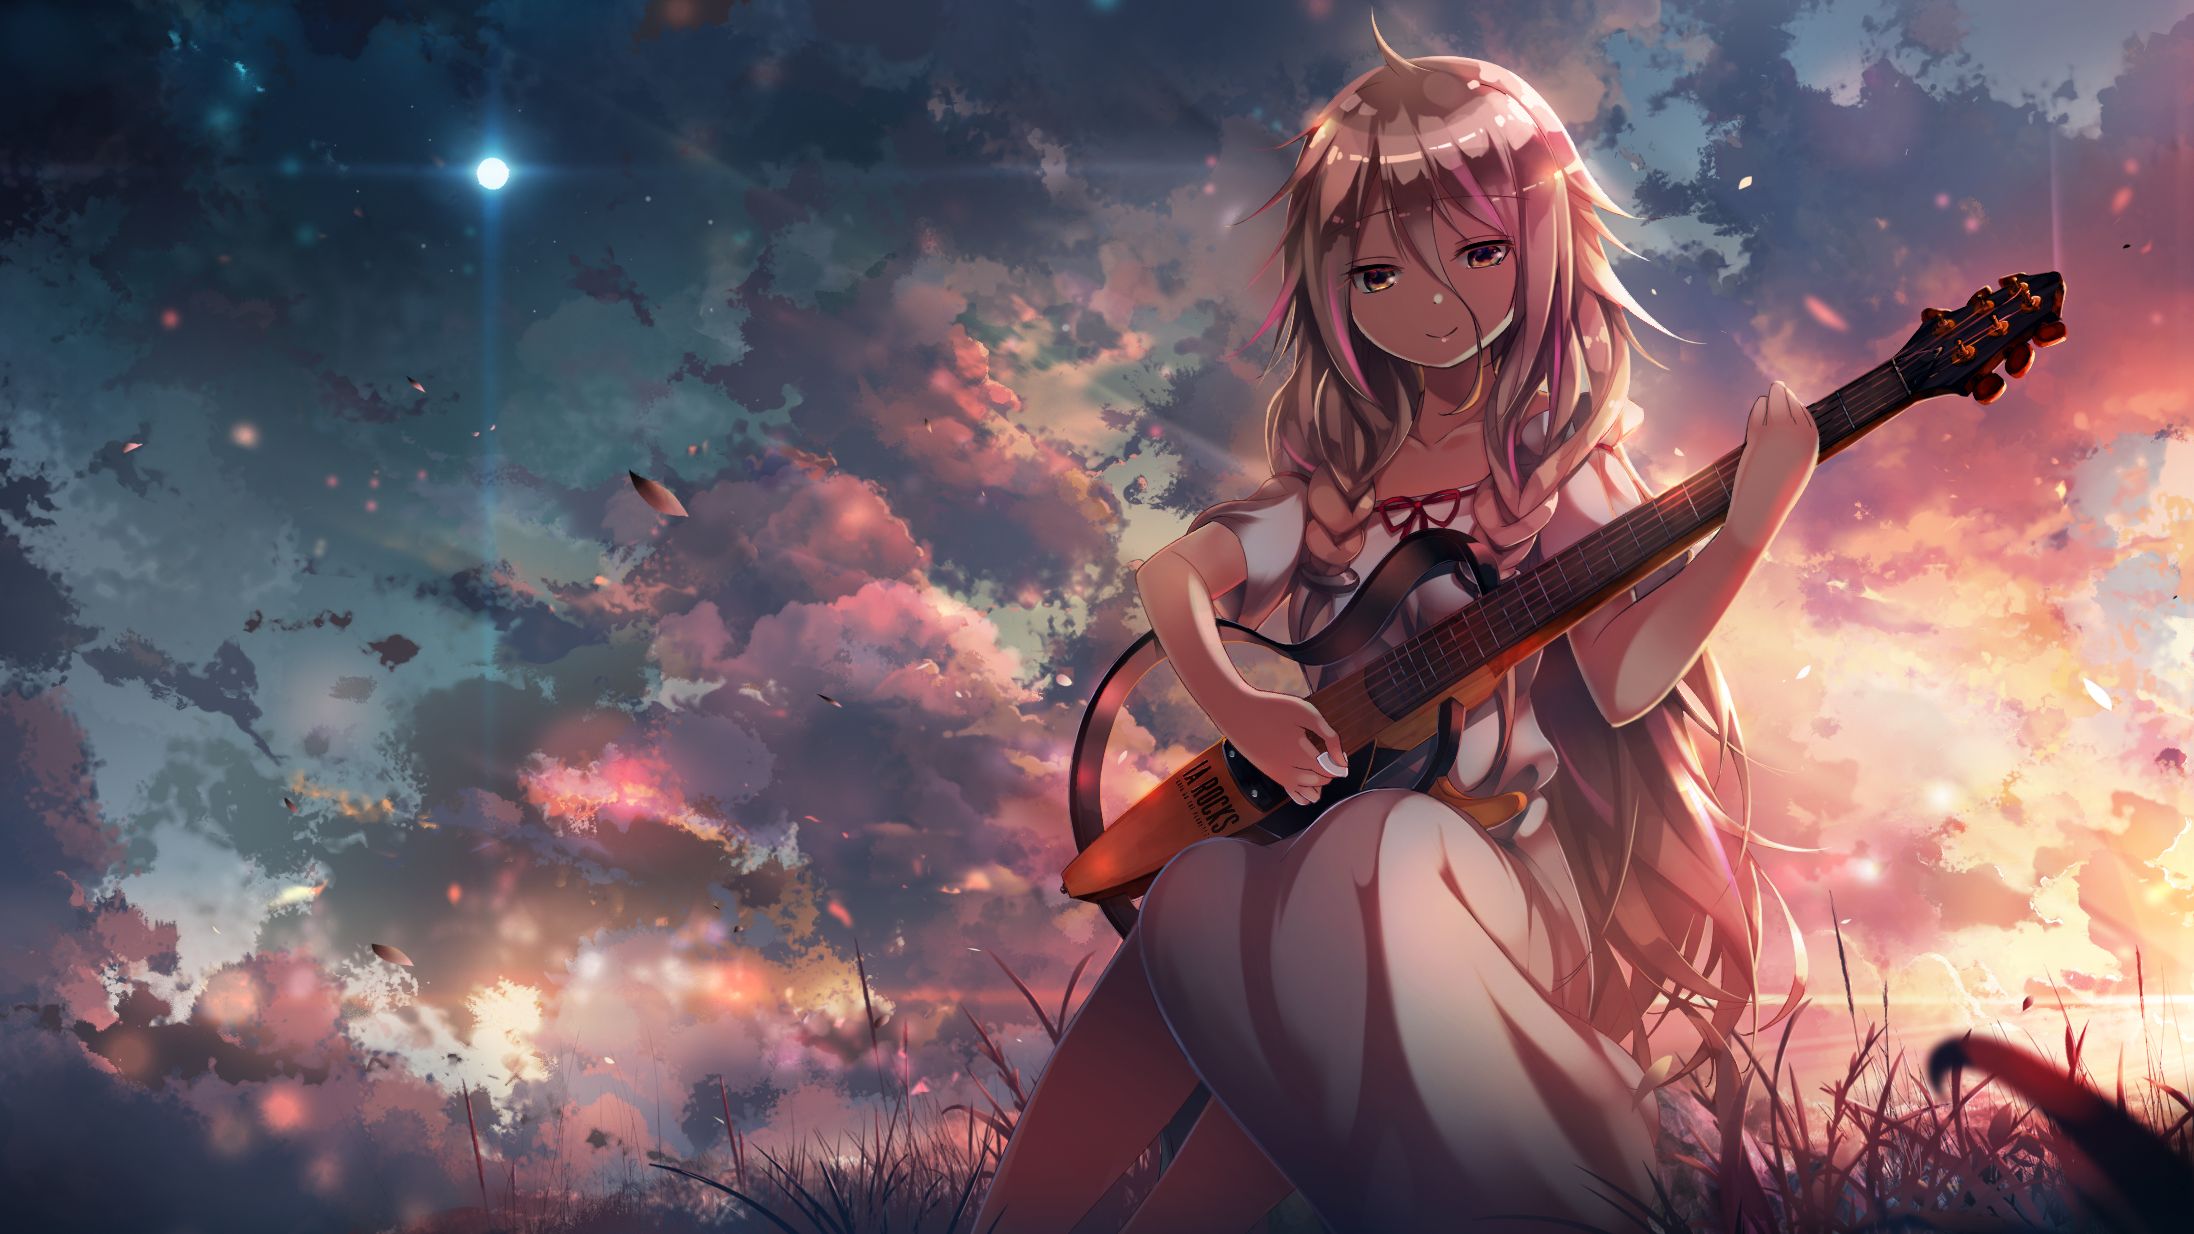 HD wallpaper anime anime girls IA Vocaloid snow nature real people   Wallpaper Flare